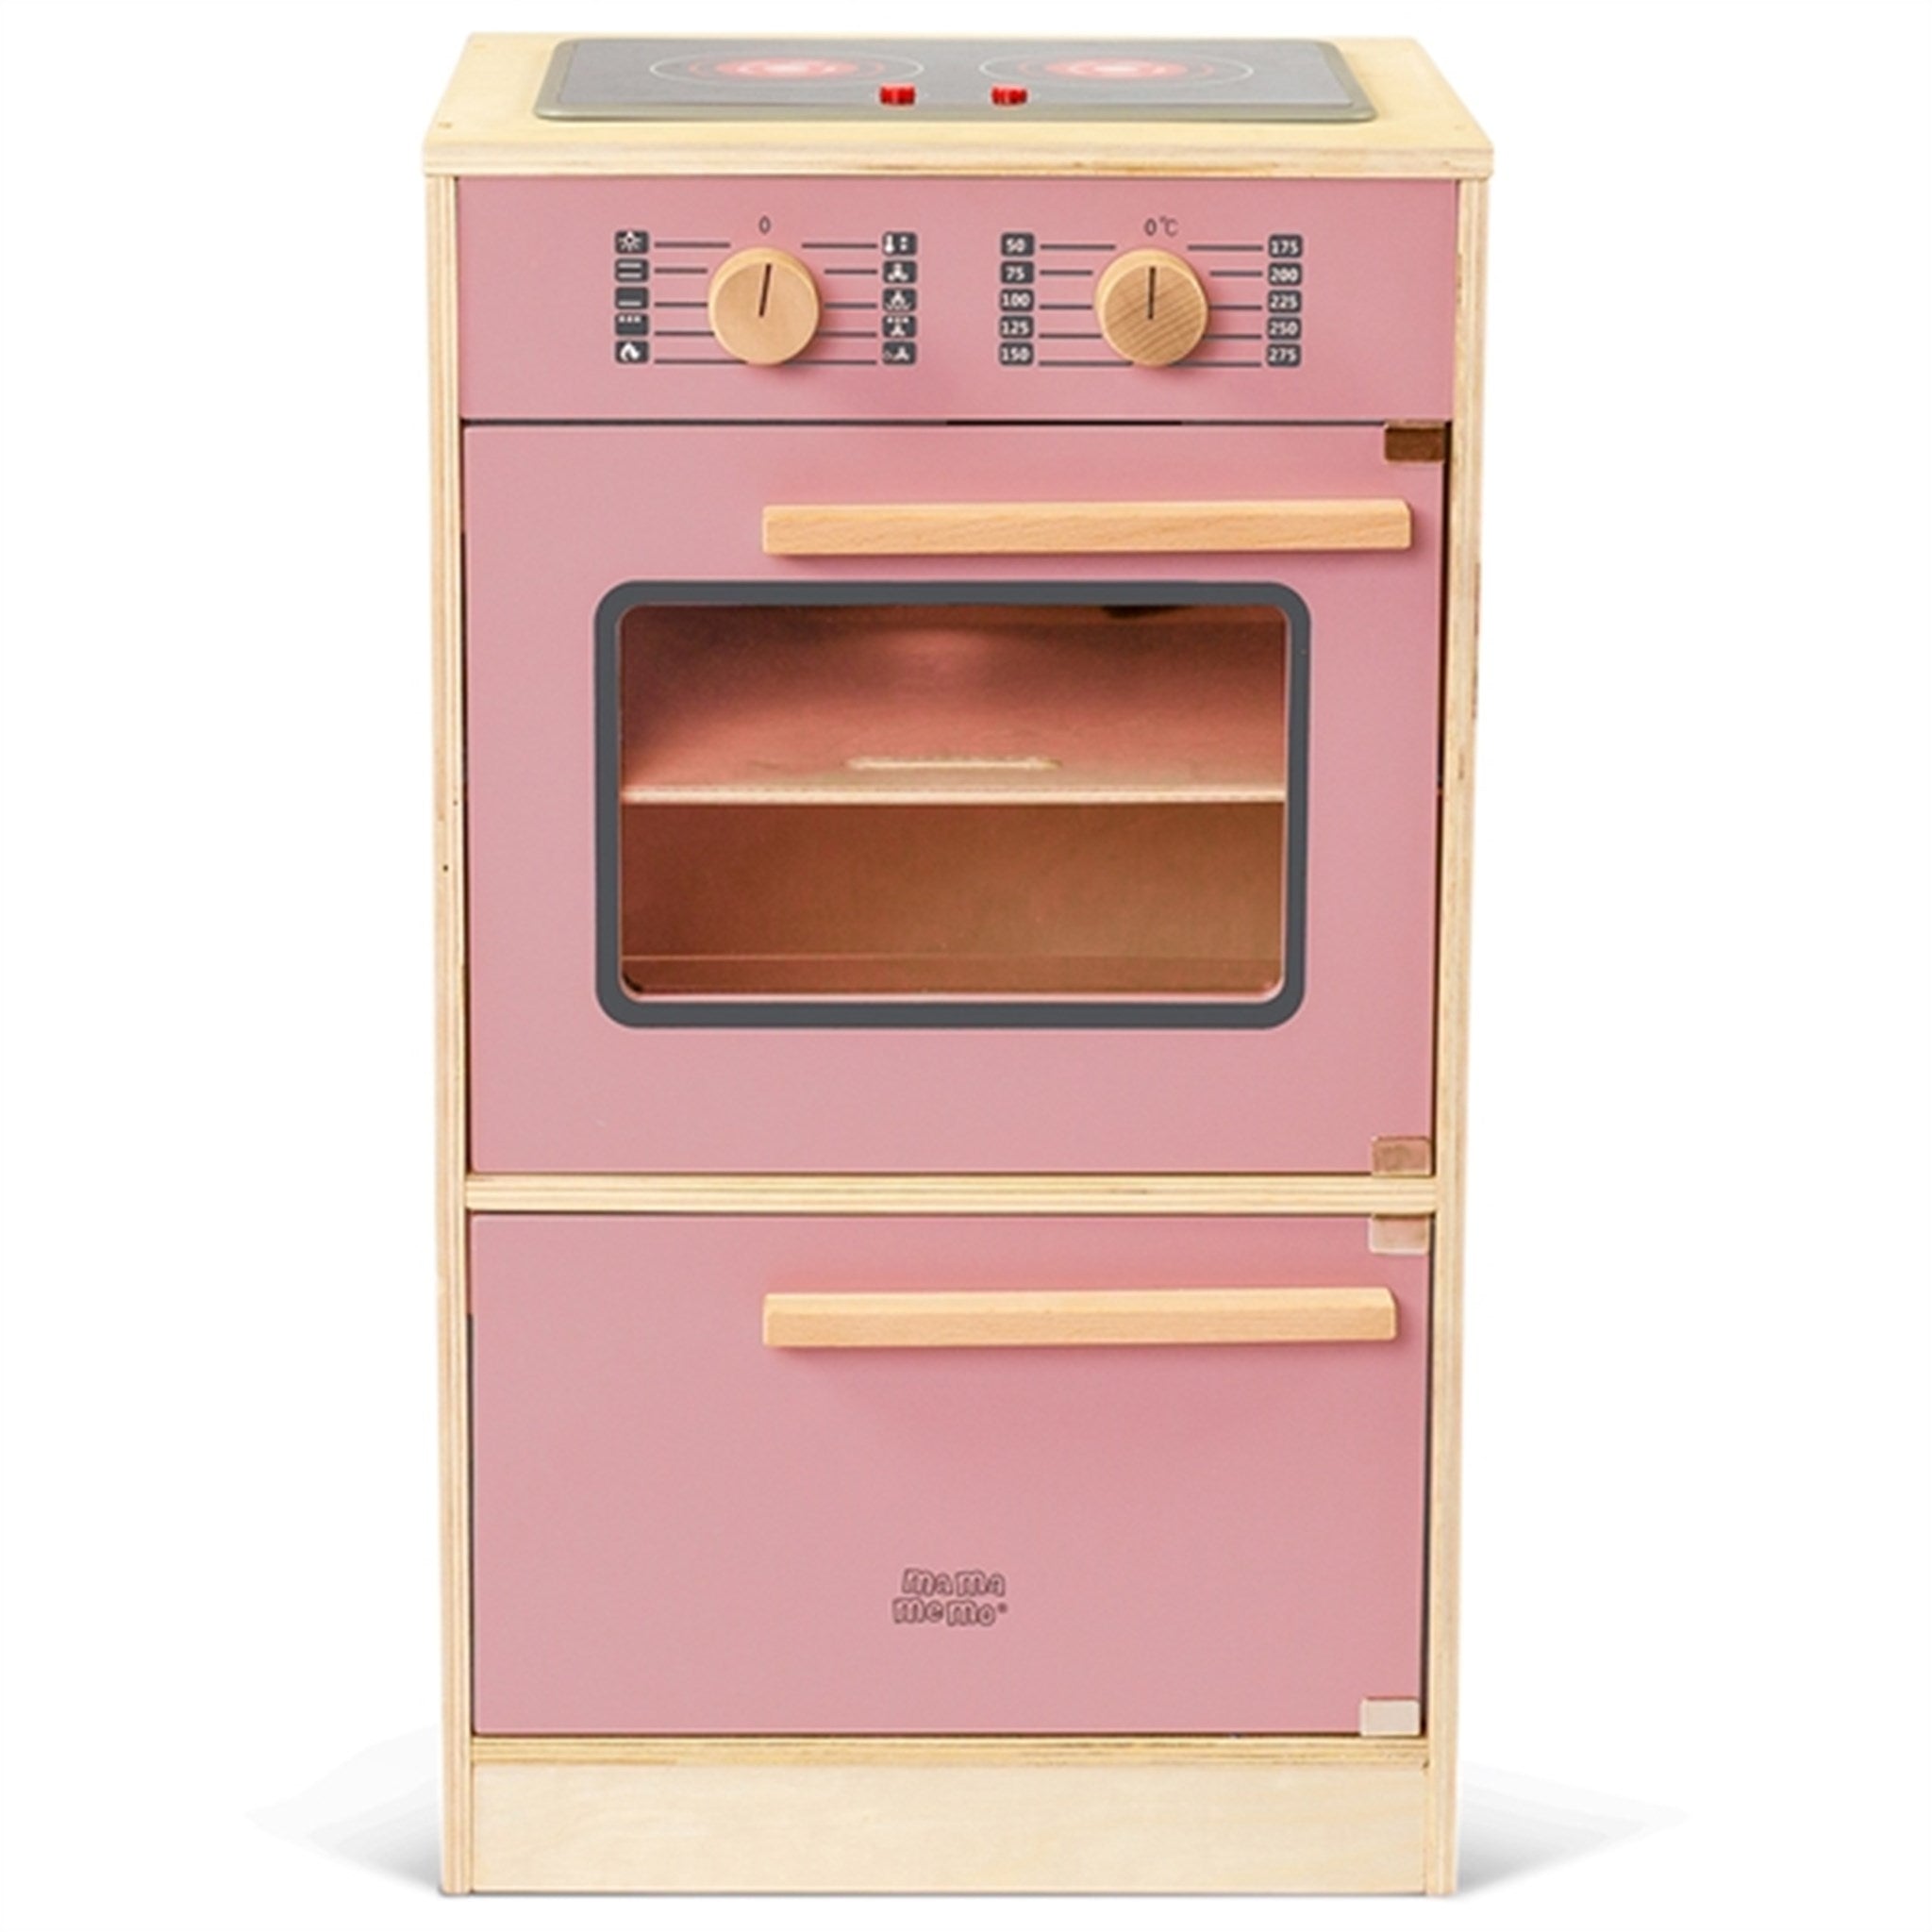 MaMaMeMo Oven with Hob Cherry Blossom